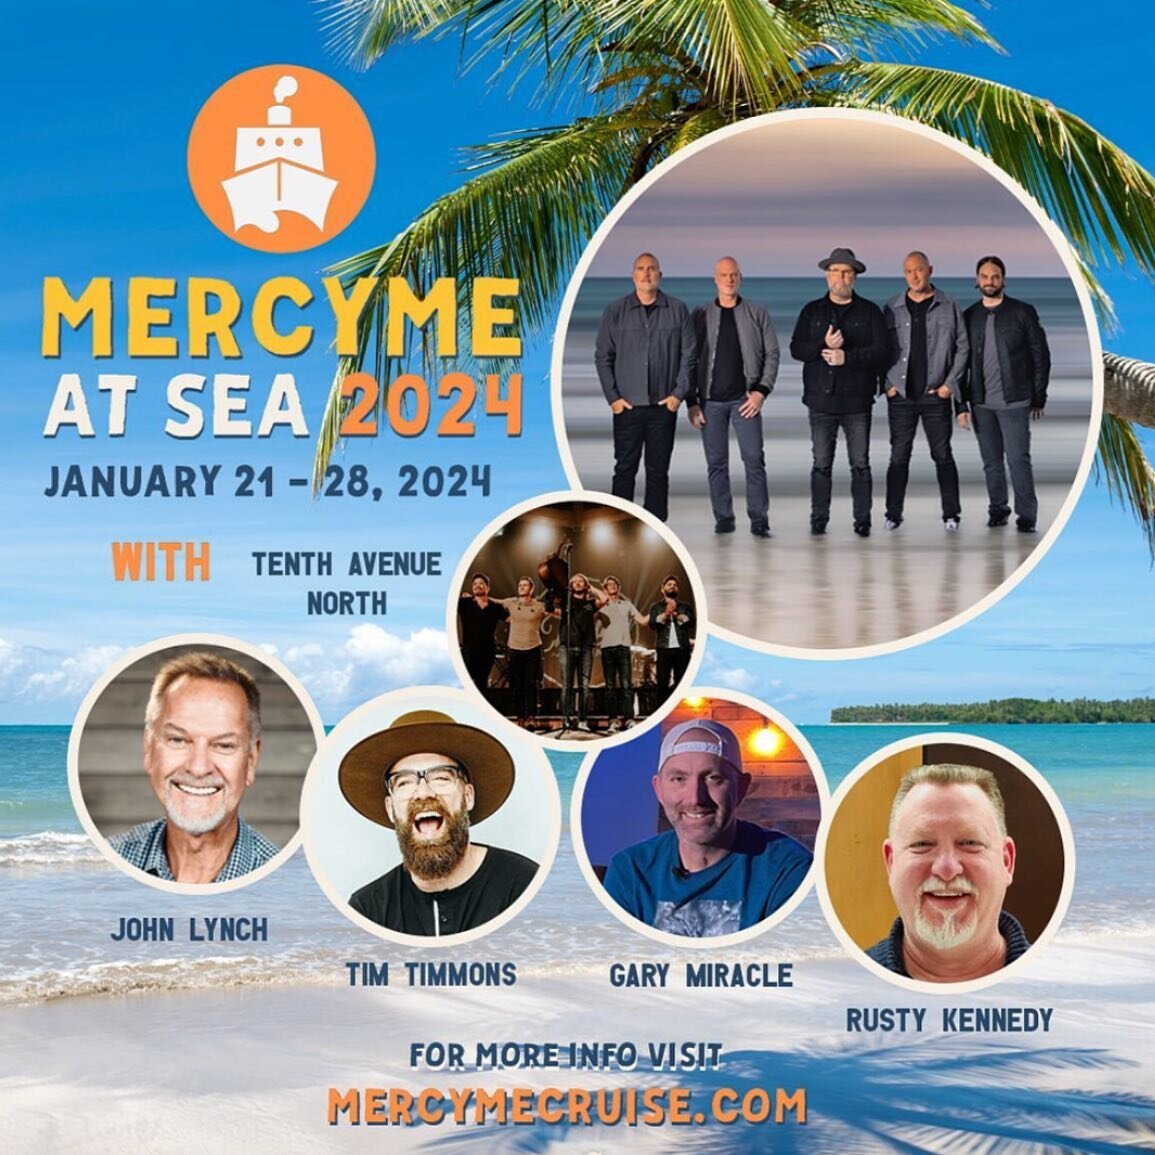 Mercyme At Sea 2024 people!!
Don&rsquo;t be dumb&hellip;sign up today! 
Come Cruise with my family, heroes, and friends.